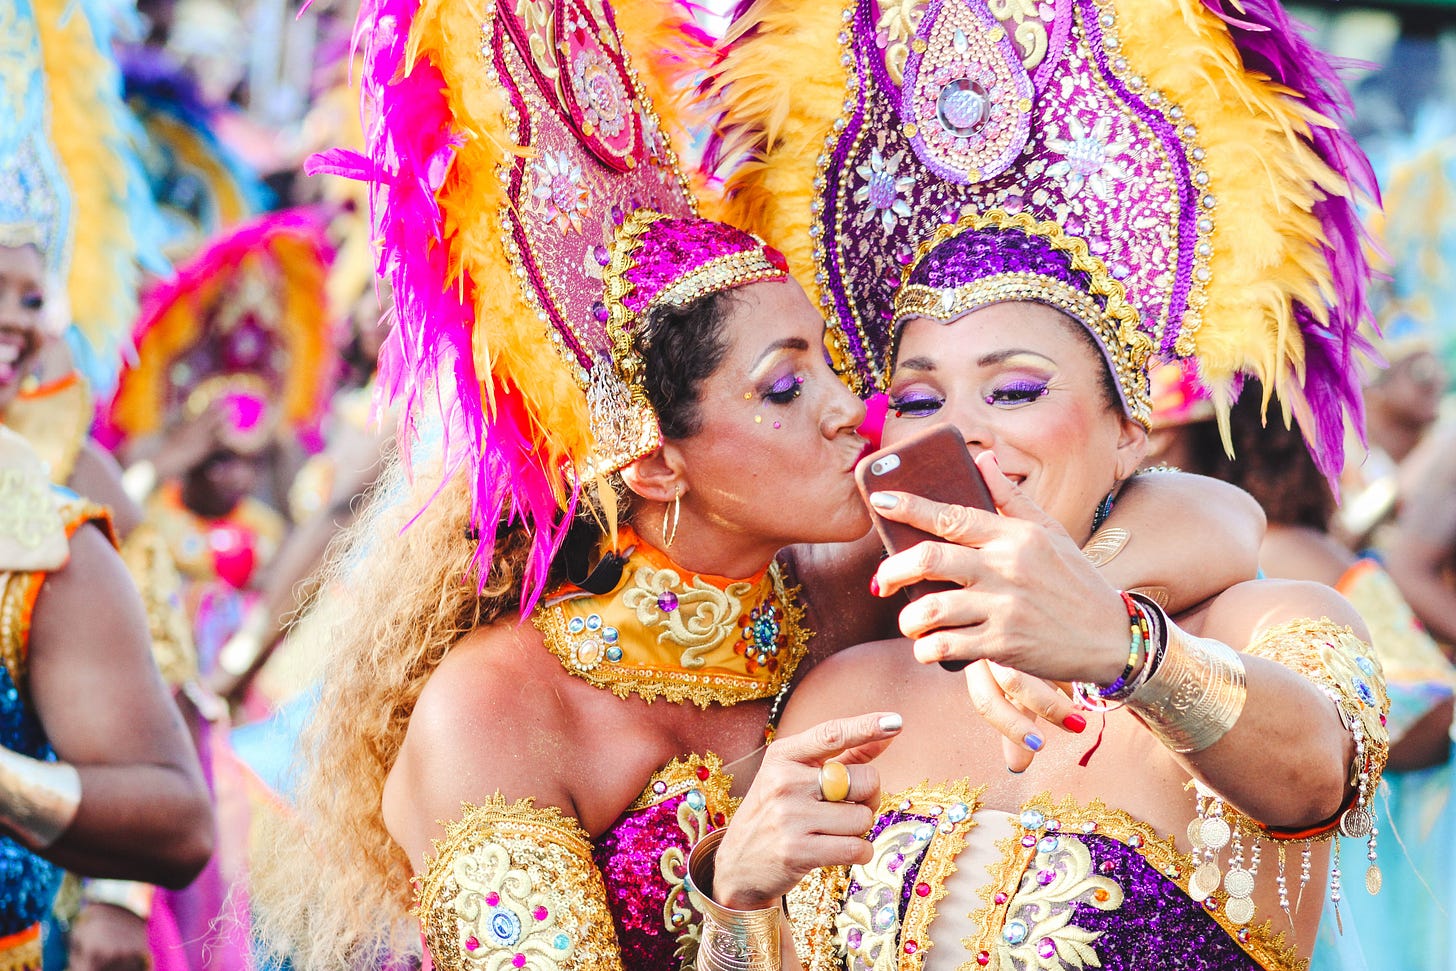 Two women Carnival dancers pose for a selfie as one kisses other on the cheek